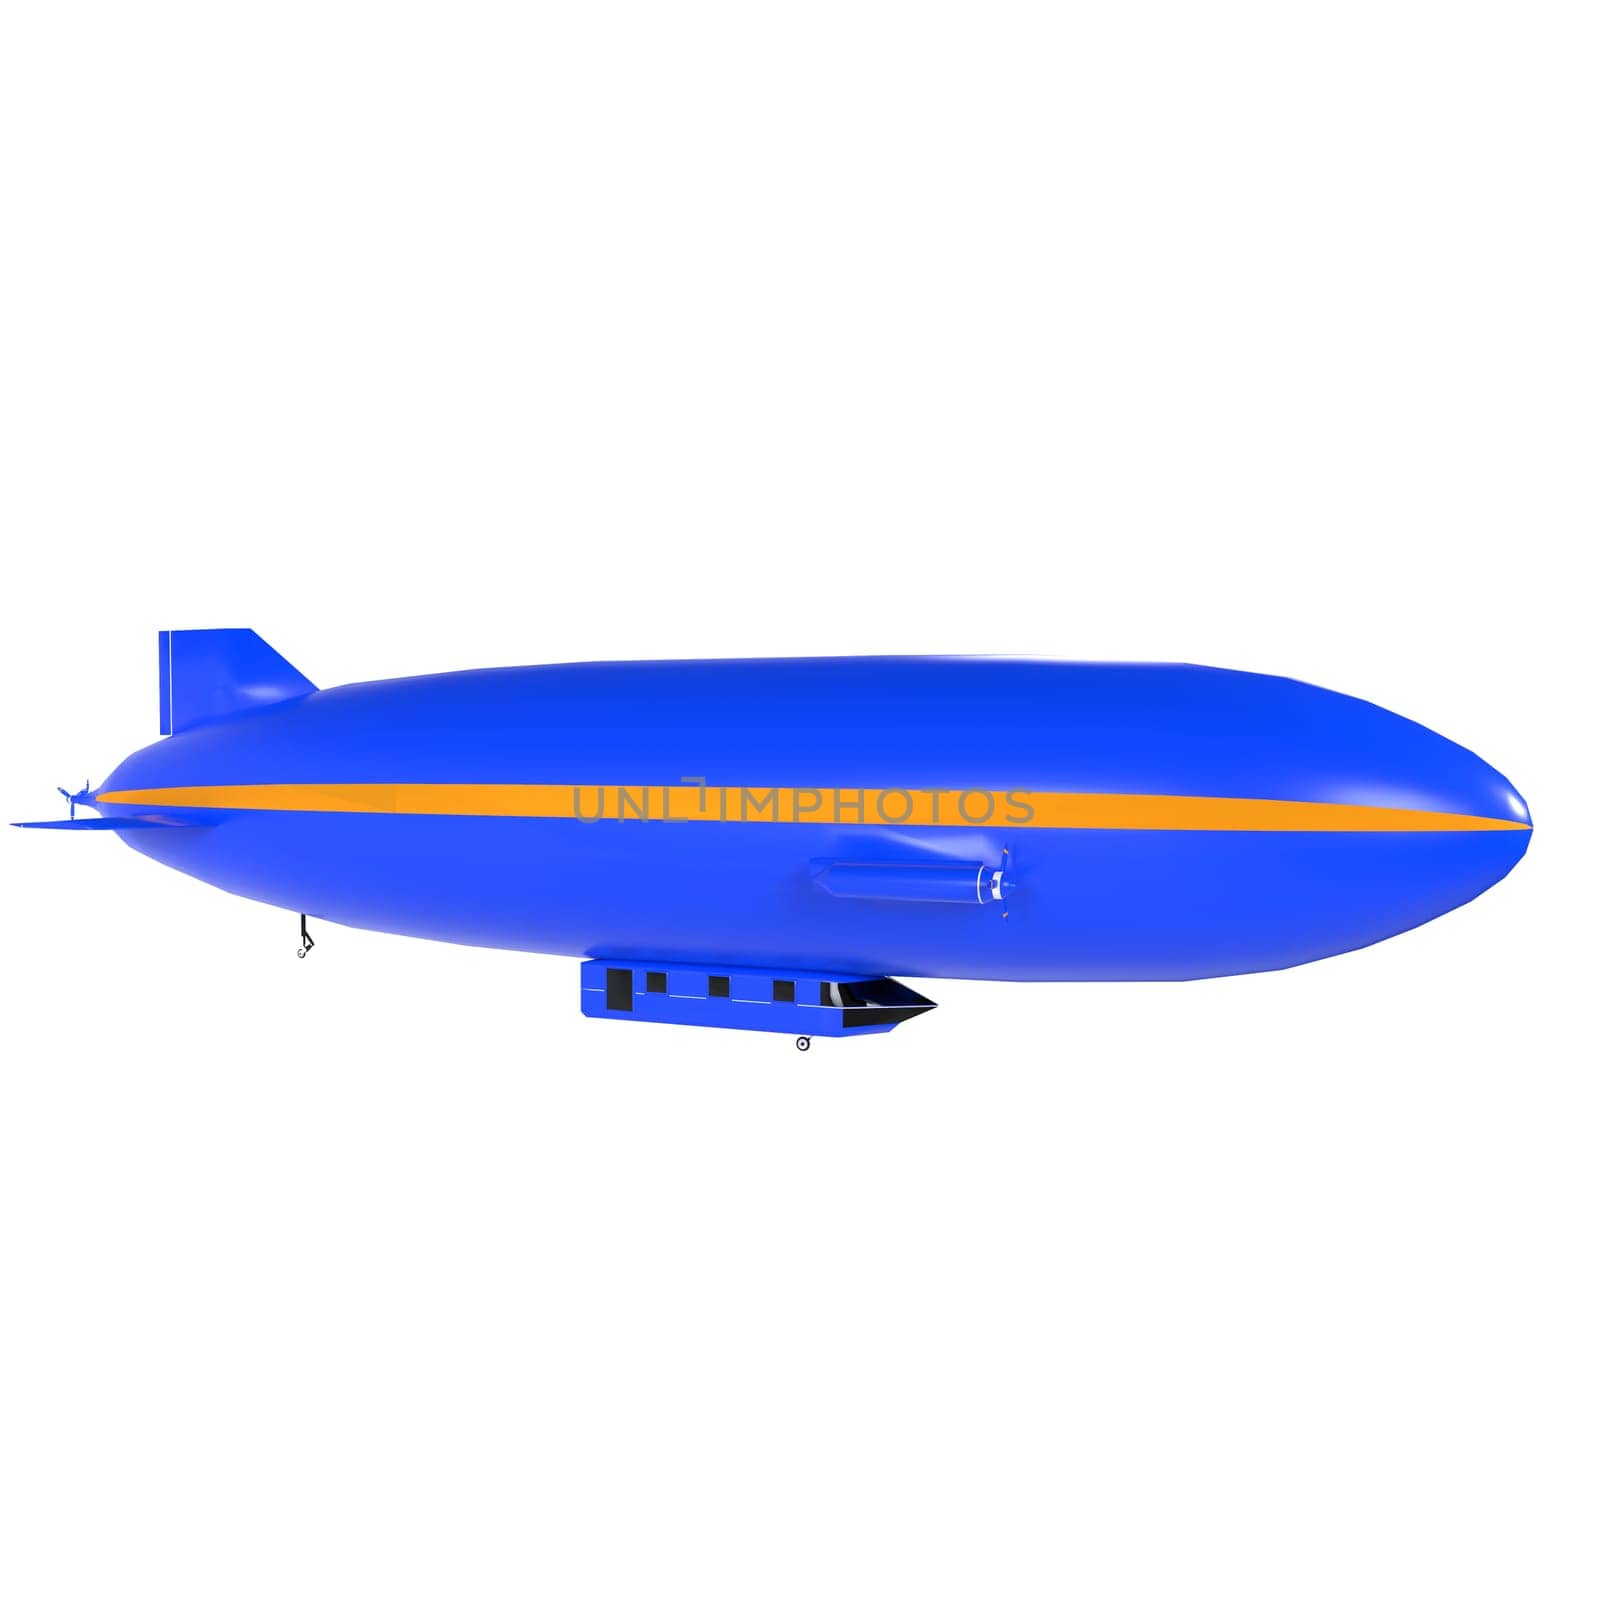 Blue Airship isolated on white background by gadreel